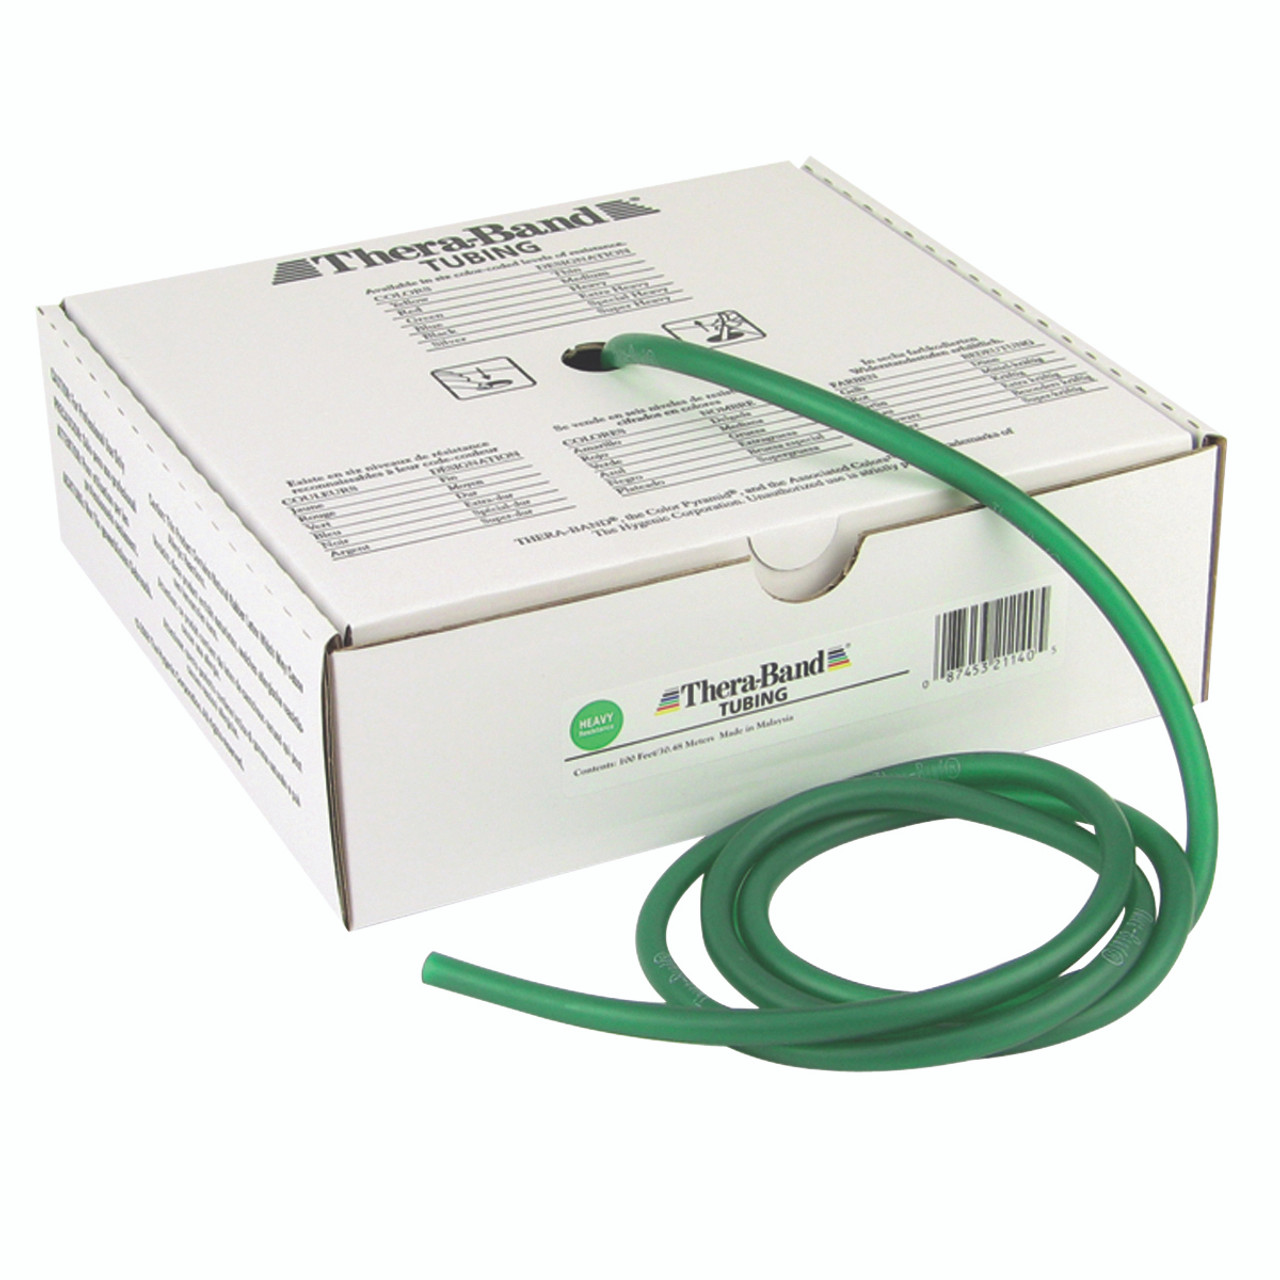 TheraBand¨ exercise tubing - 100 foot roll - Green - heavy